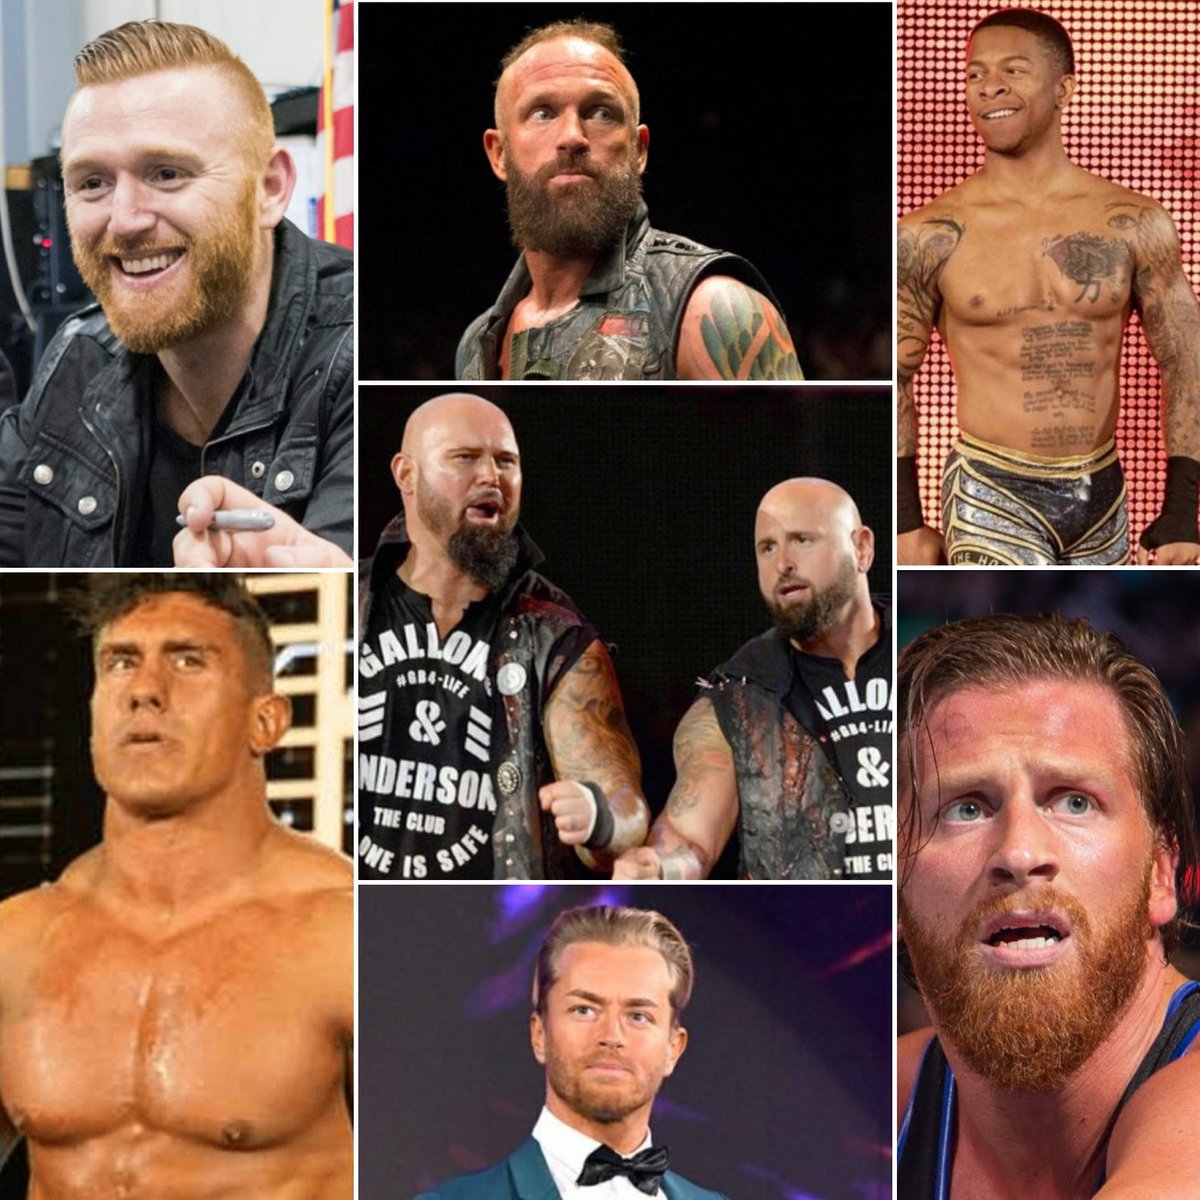 Currently 8 WWE talents have been released.Because of how this has been rolling out we may see more as the week goes on.Sucks to see it happen but here's the list so far:Karl AndersonLuke Gallows Curt HawkinsLio RushEC3Curt HawkinsEric YoungDrake MavericHeath Slater